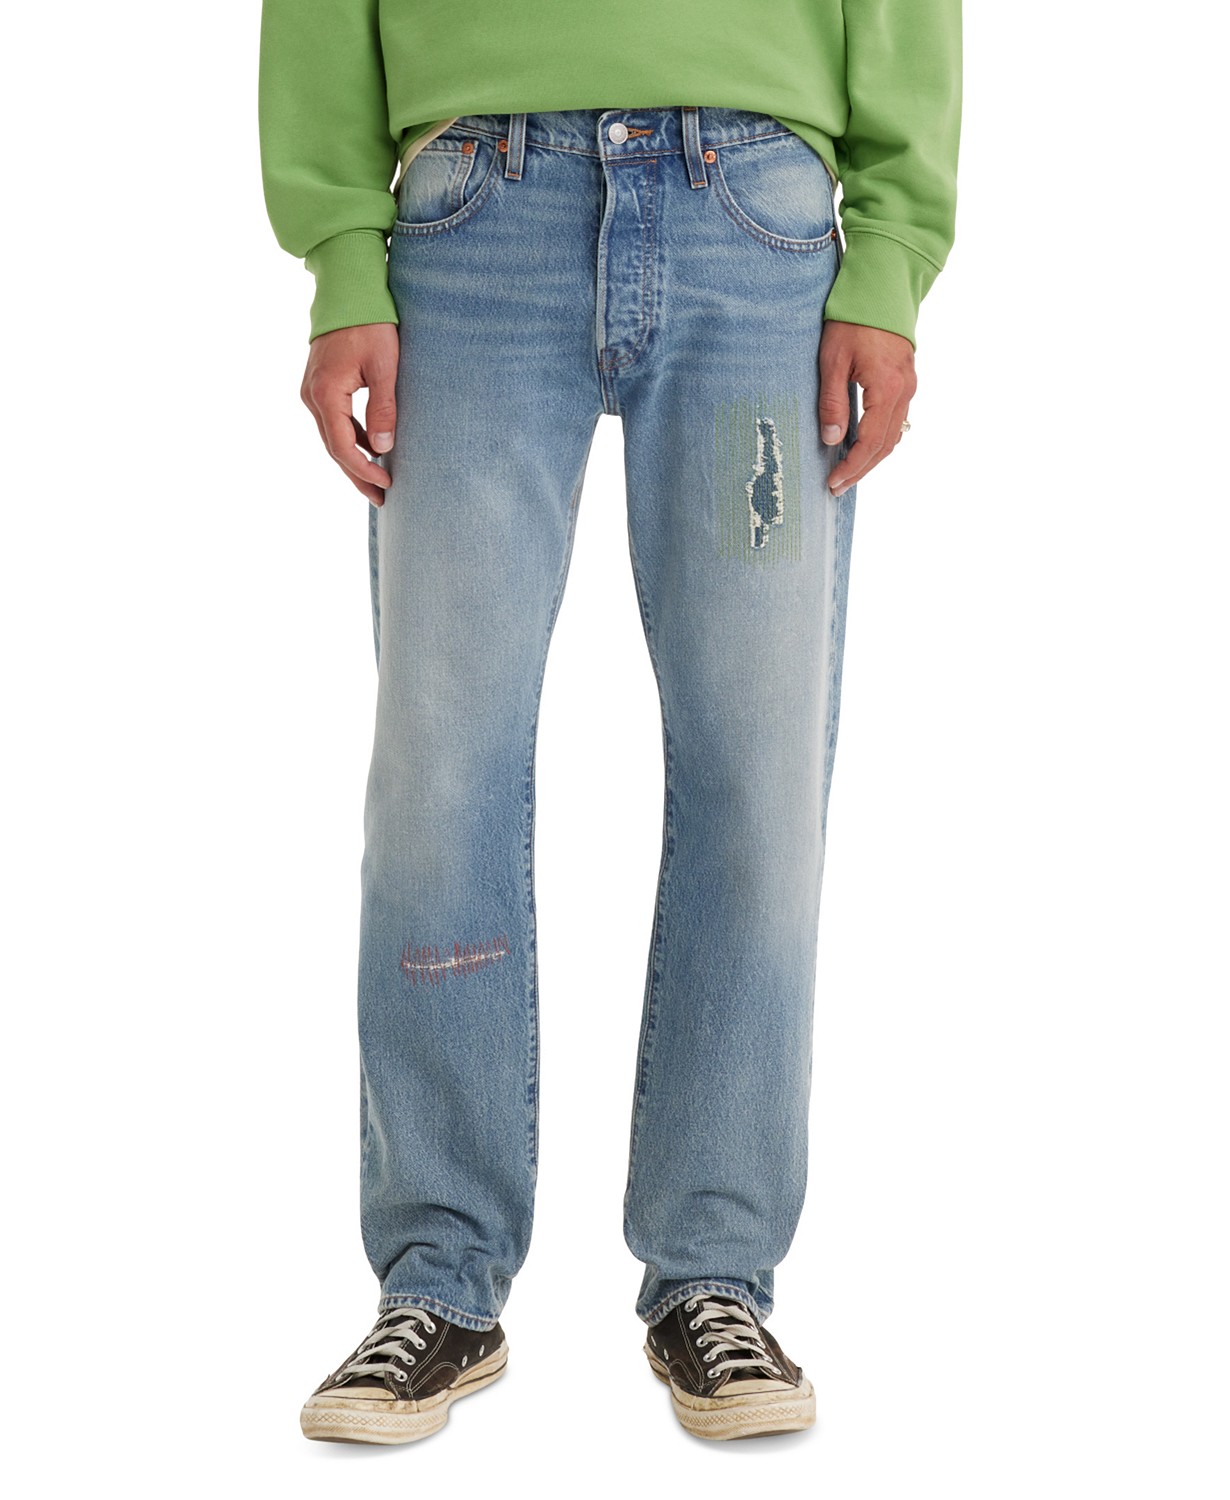 Mens Skateboarding 501 Straight-Fit Stretch Jeans